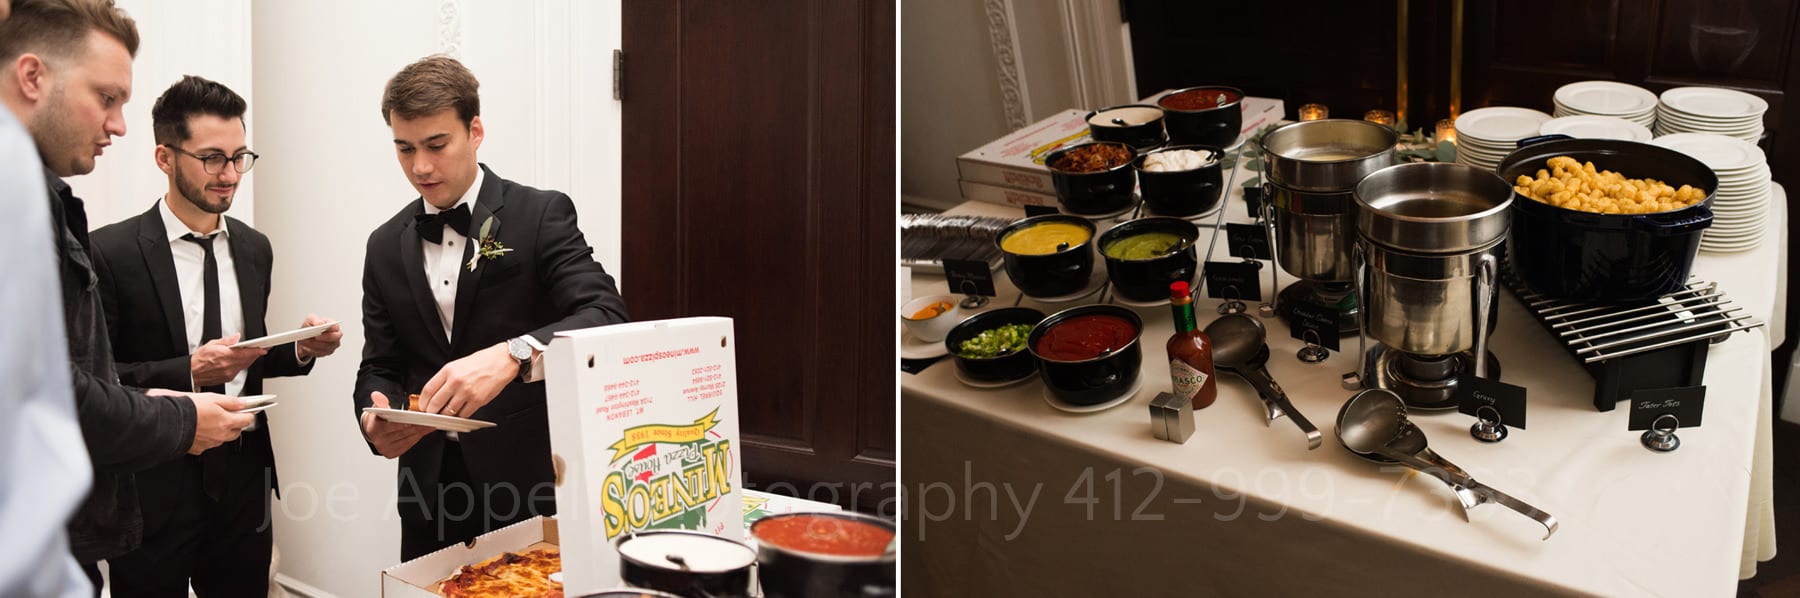 a black tuxedoed groom and two male guests also in black pick pieces of pizza from a box. The second photo shows an extensive tater tot bar with cheese, sauces, green onions, guacamole, and bacon during a hotel monaco pittsburgh wedding.